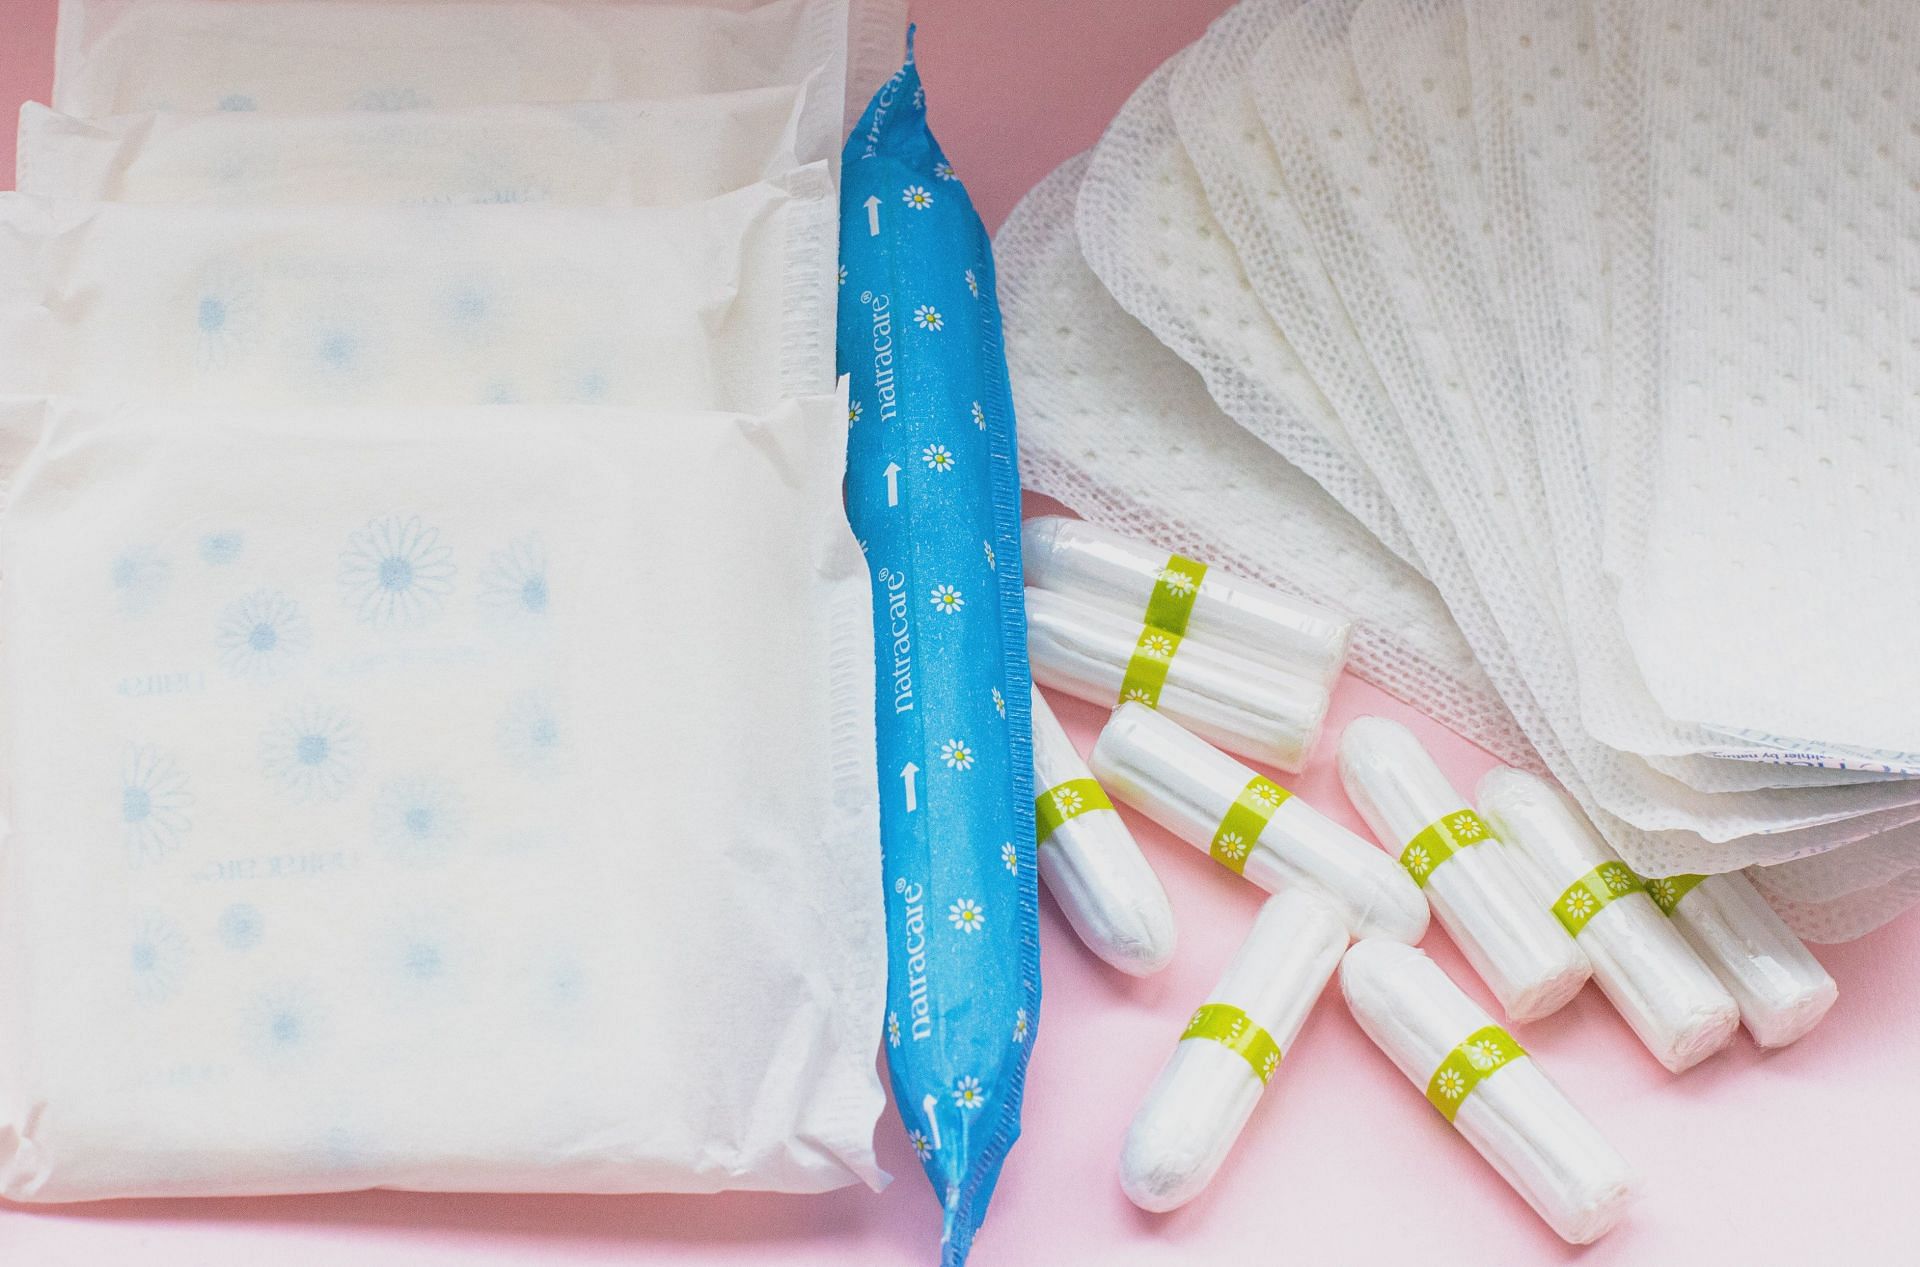 Is it bad to sleep with a tampon in? (Image sourced via Unsplash / Photo by NatraCare)